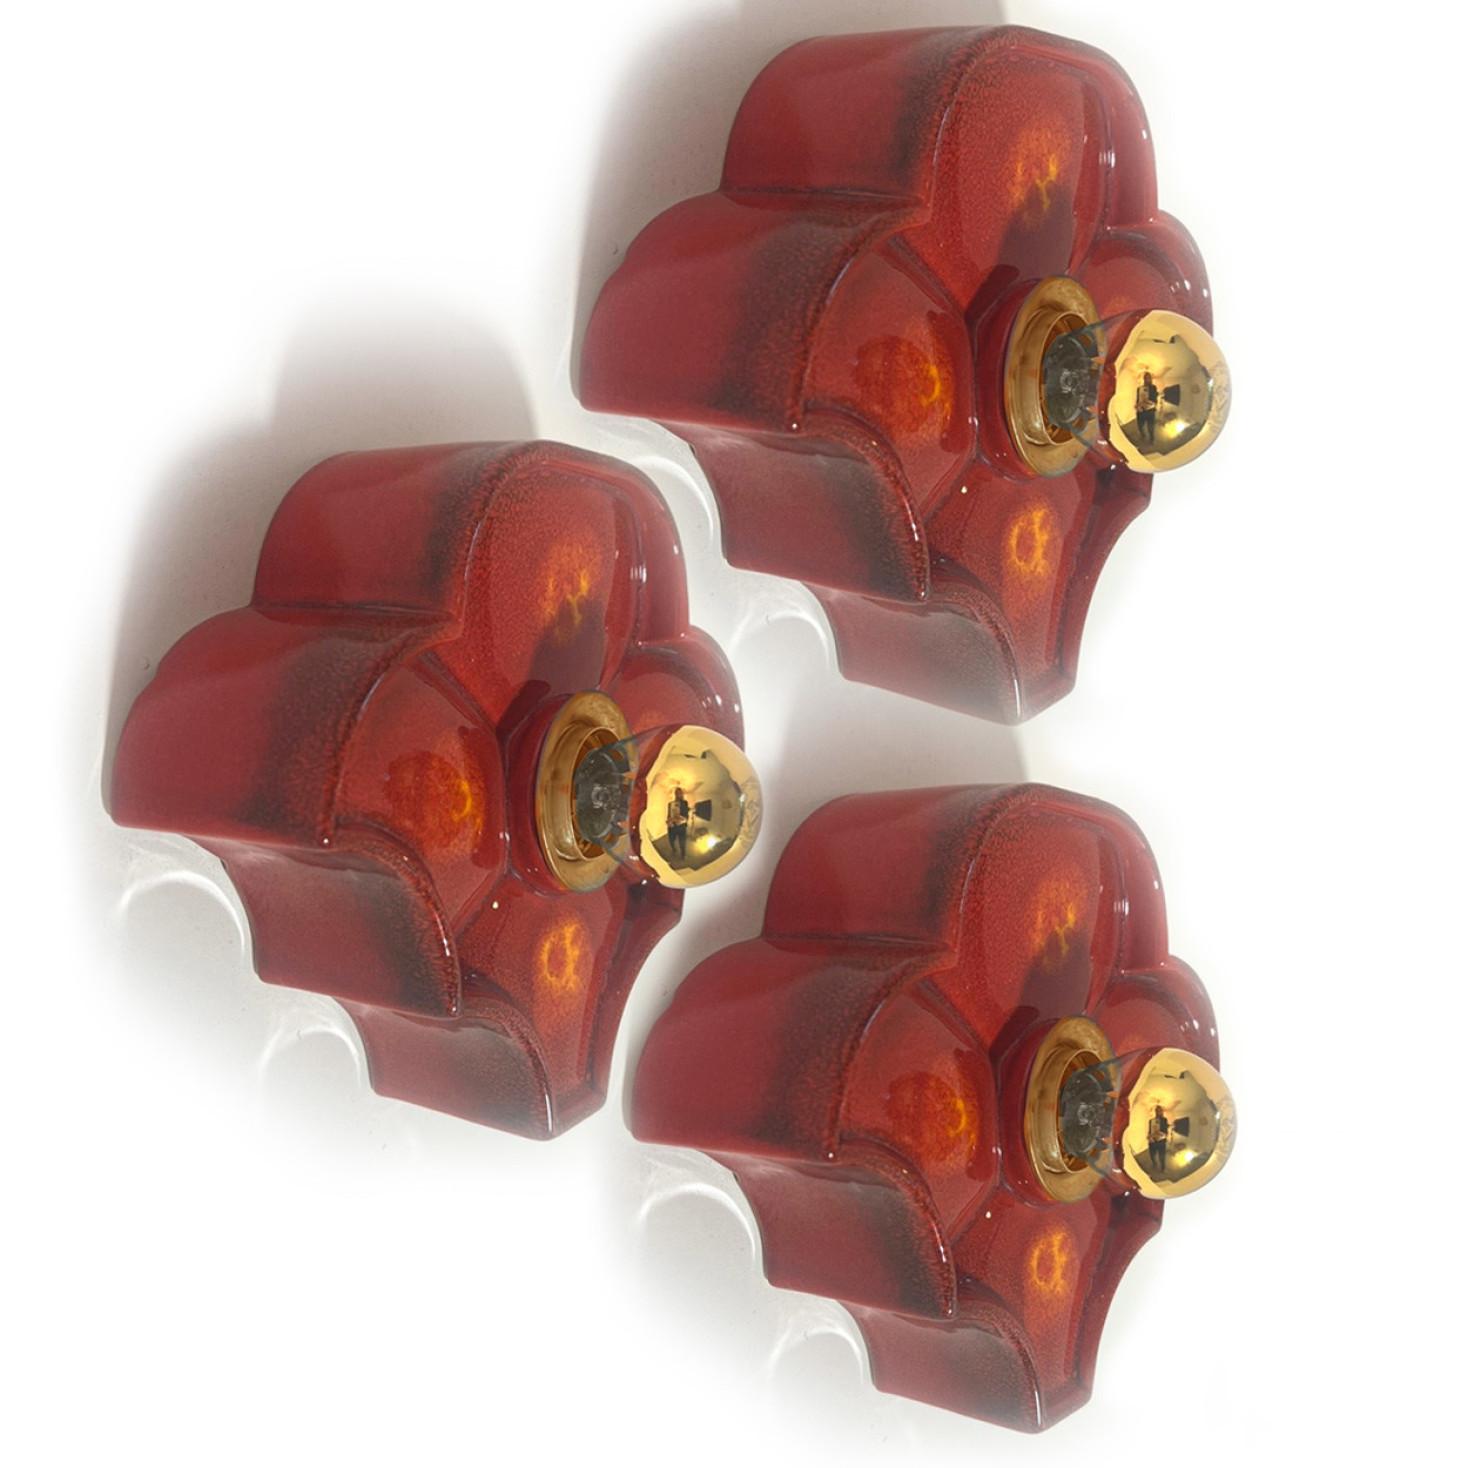 Several Flower Red Ceramic Wall Lights by Hustadt Keramik, Germany, 1970 For Sale 3